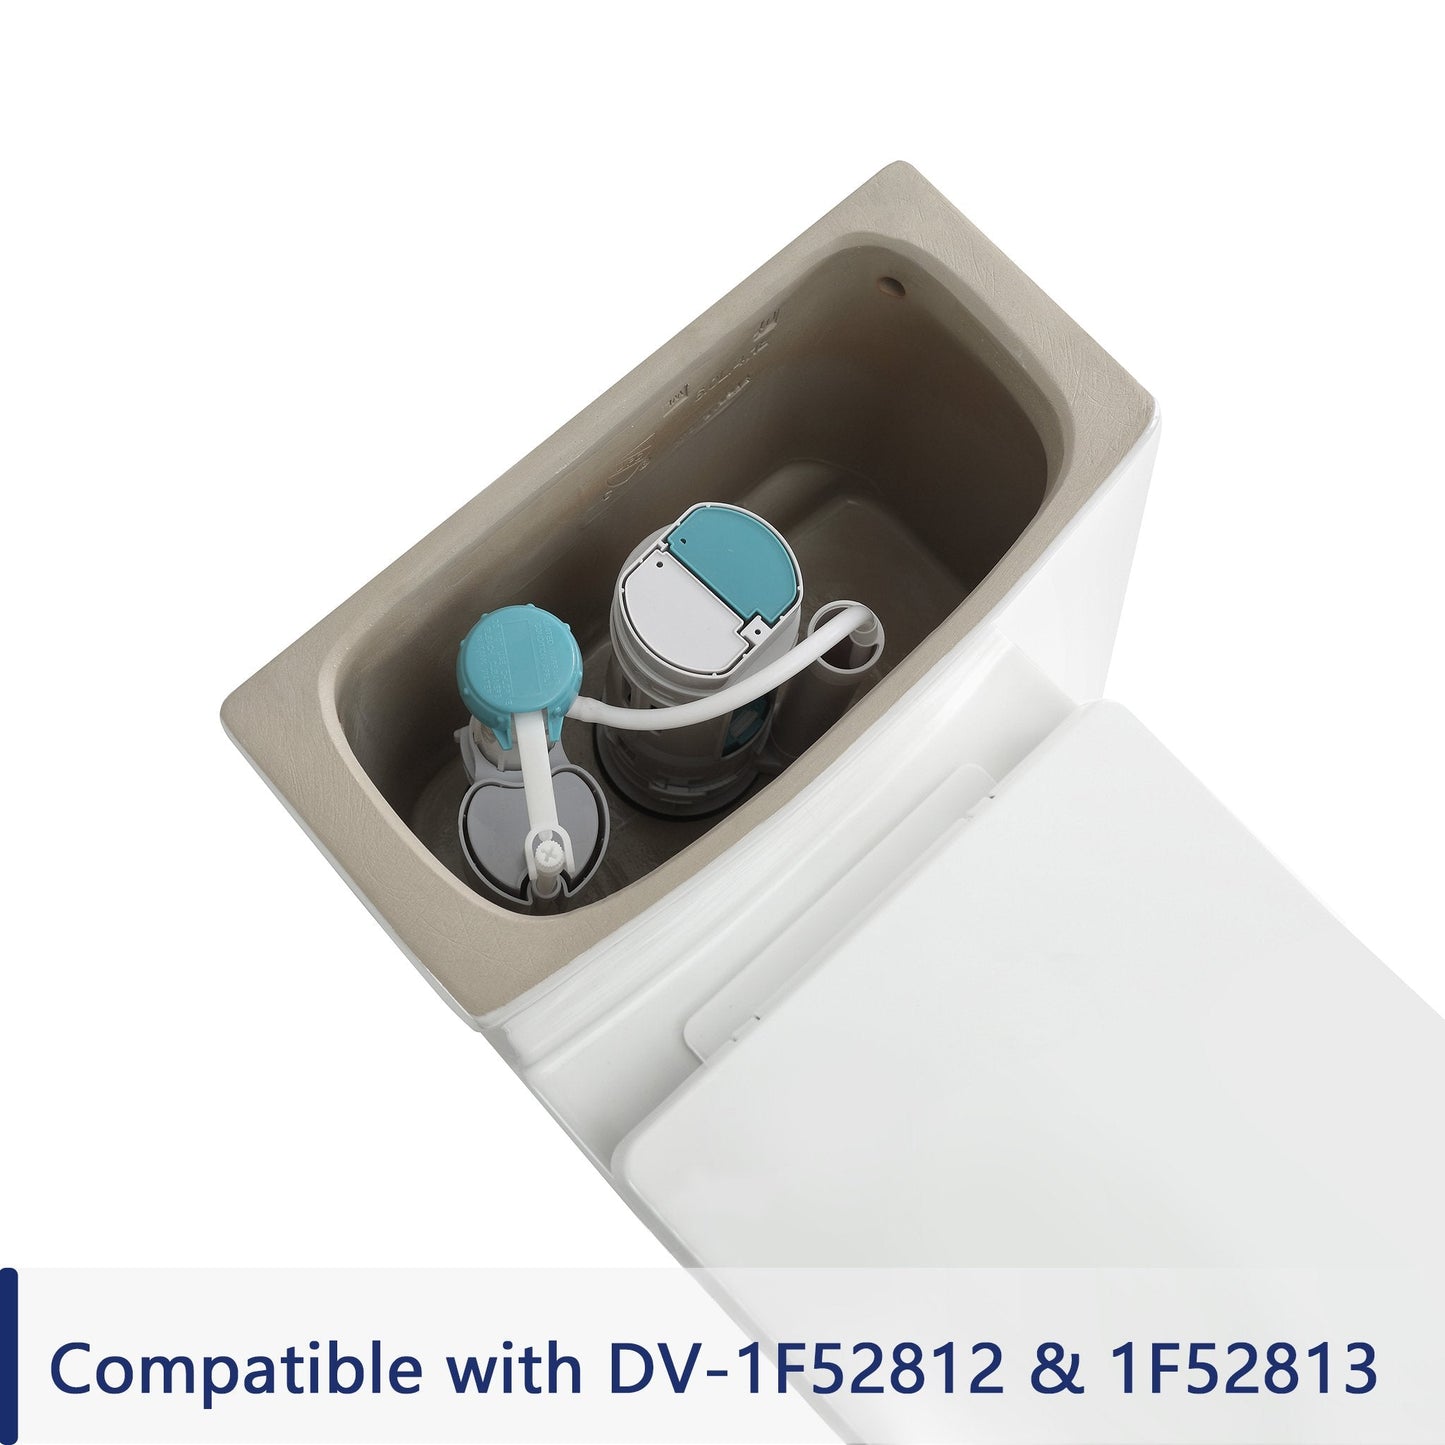 DeerValley Fill Valve (Fit with DV-1F52812 and DV-1F52813)